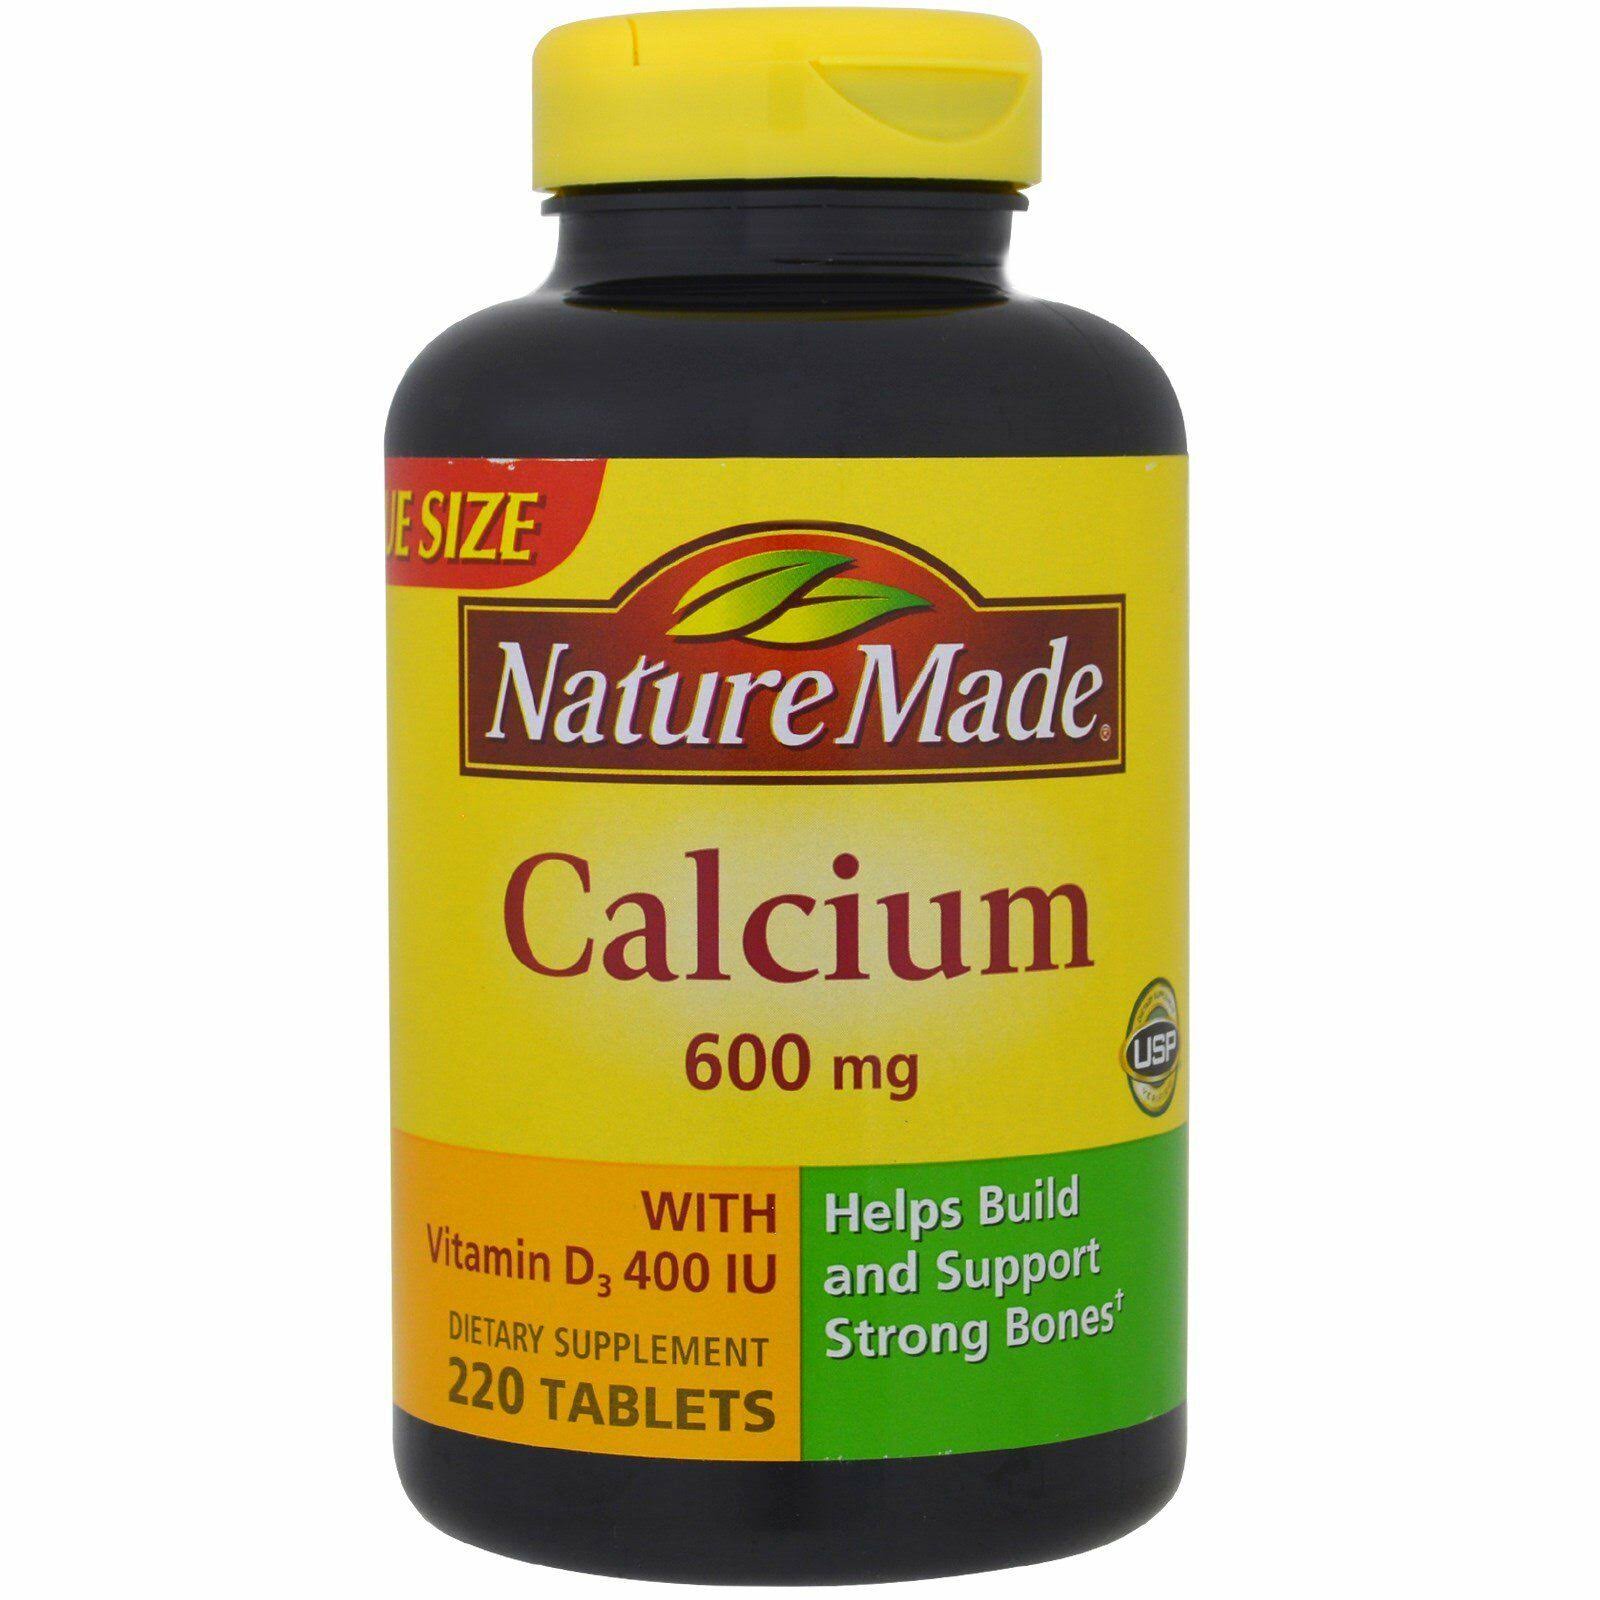 Nature Made Dietary Supplement Calcium Tablets - 600mg, 220 count